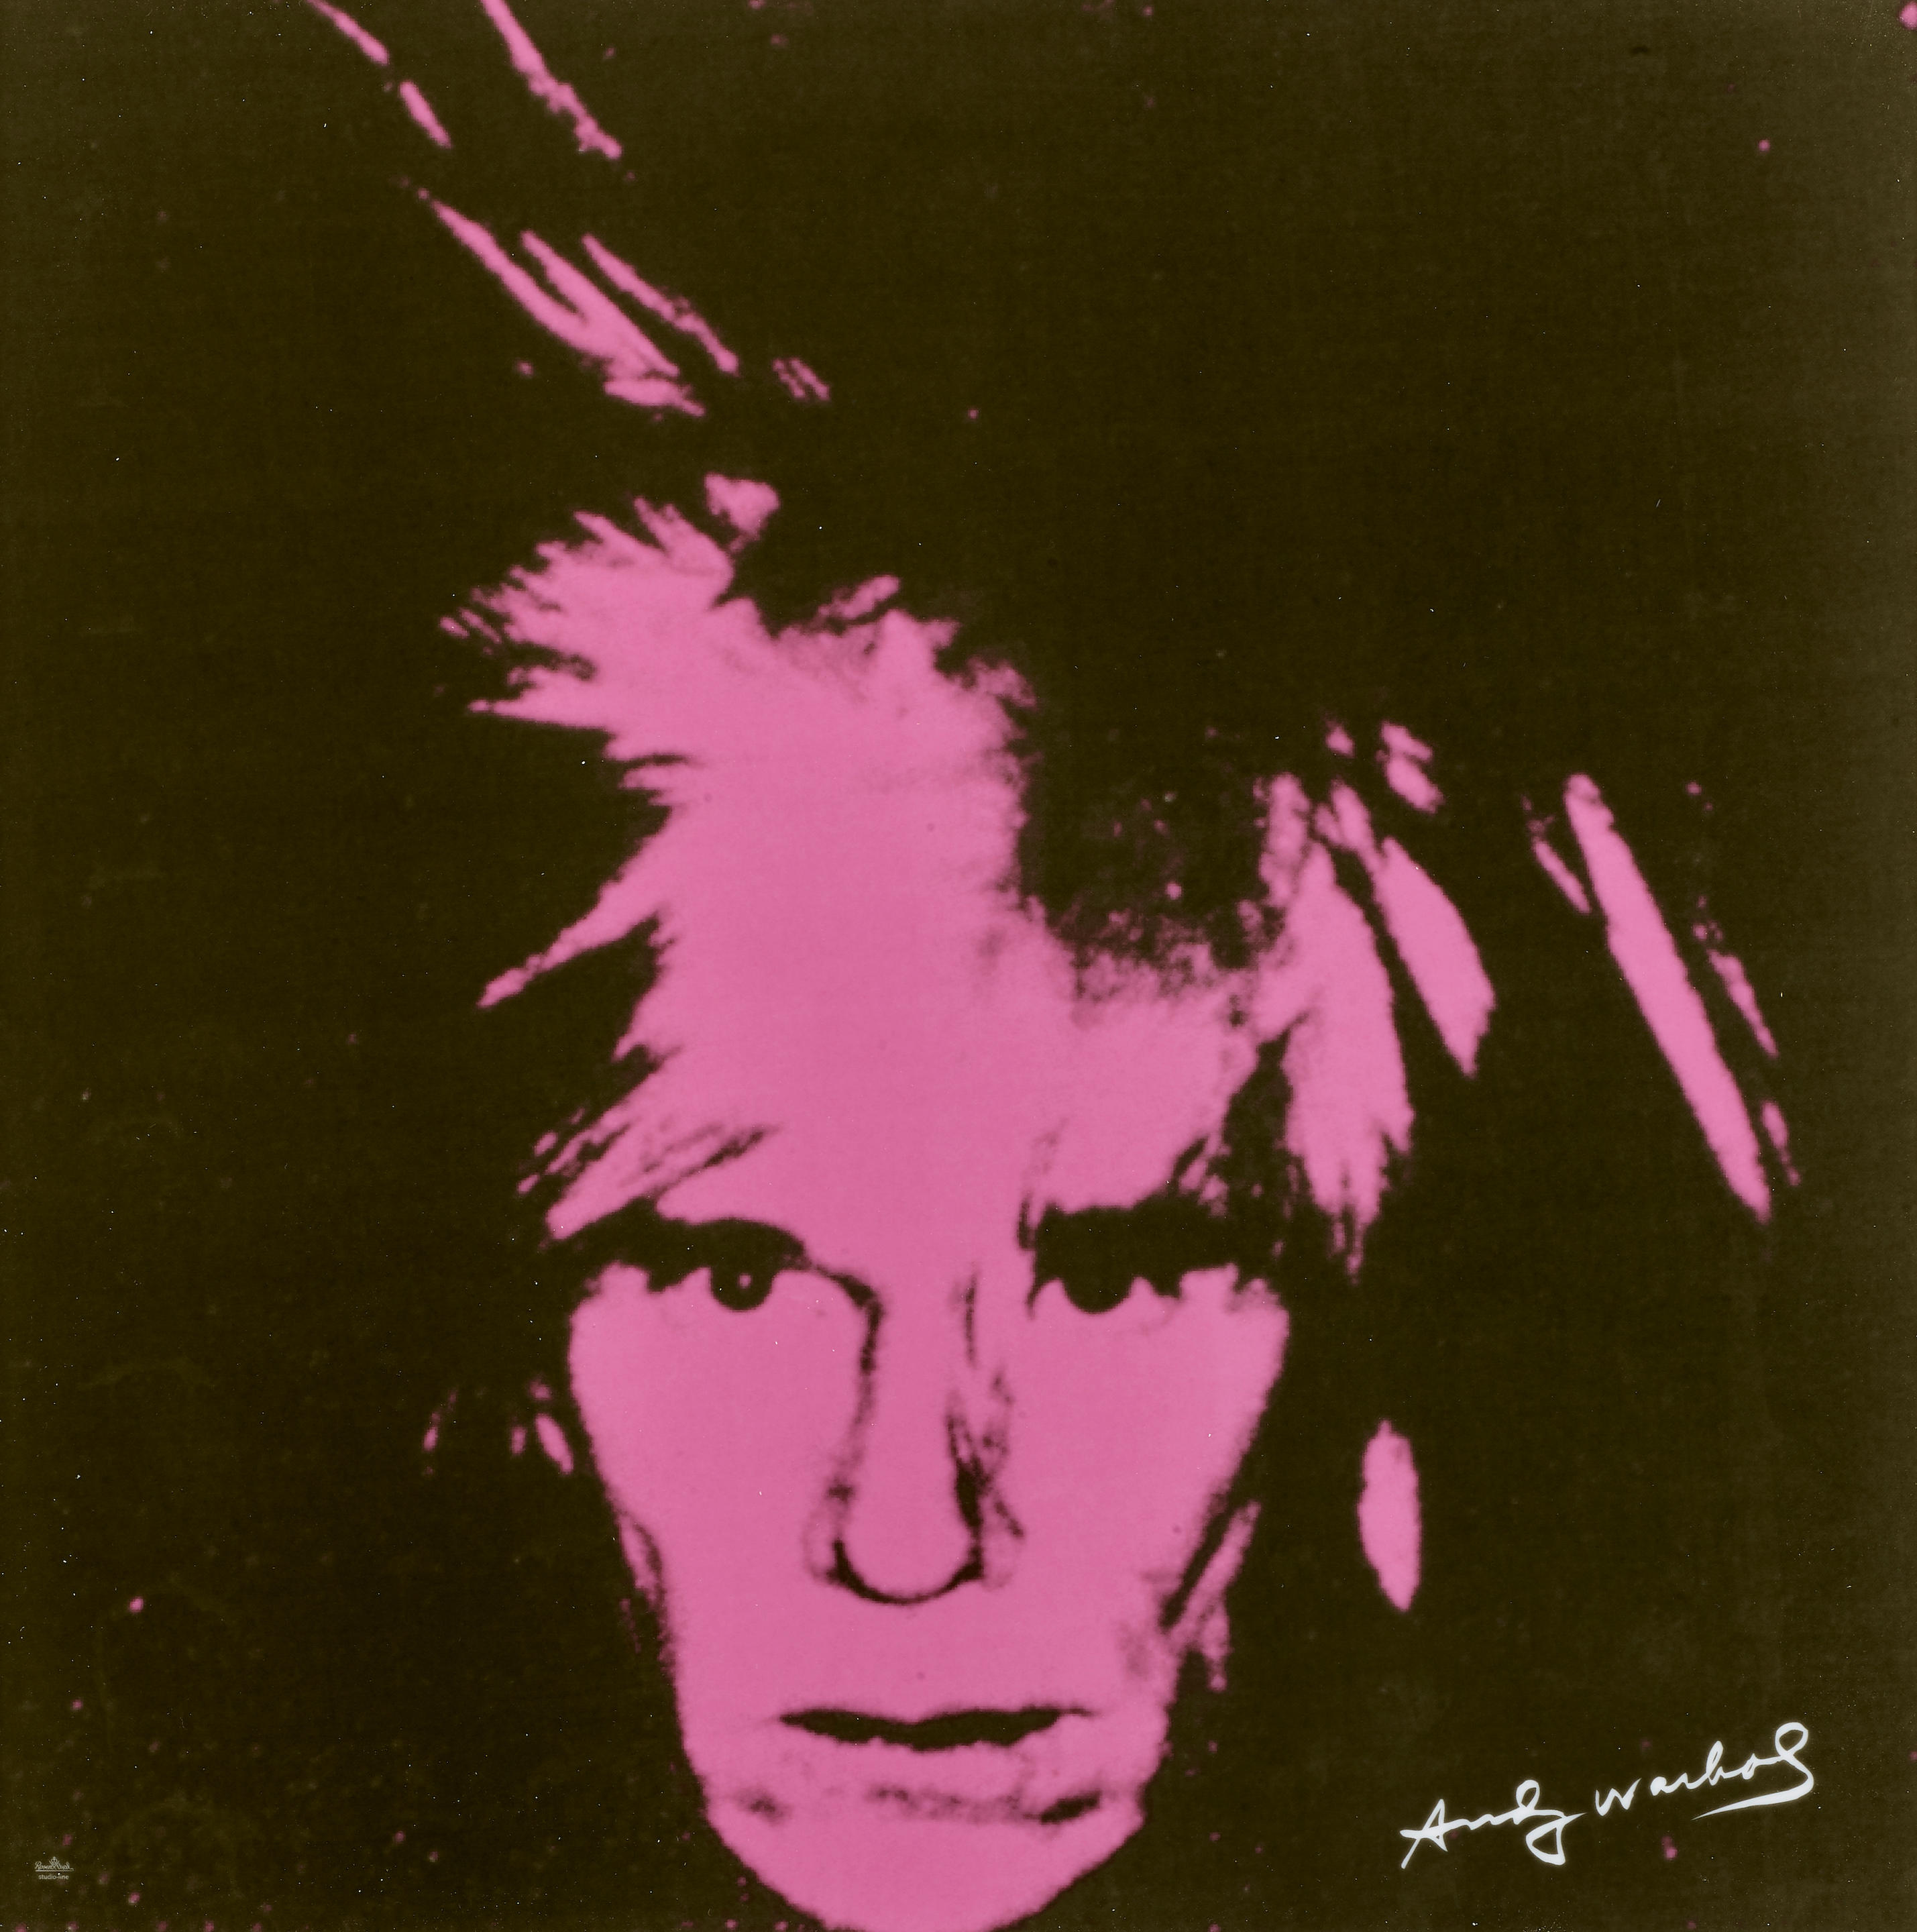 After Andy Warhol